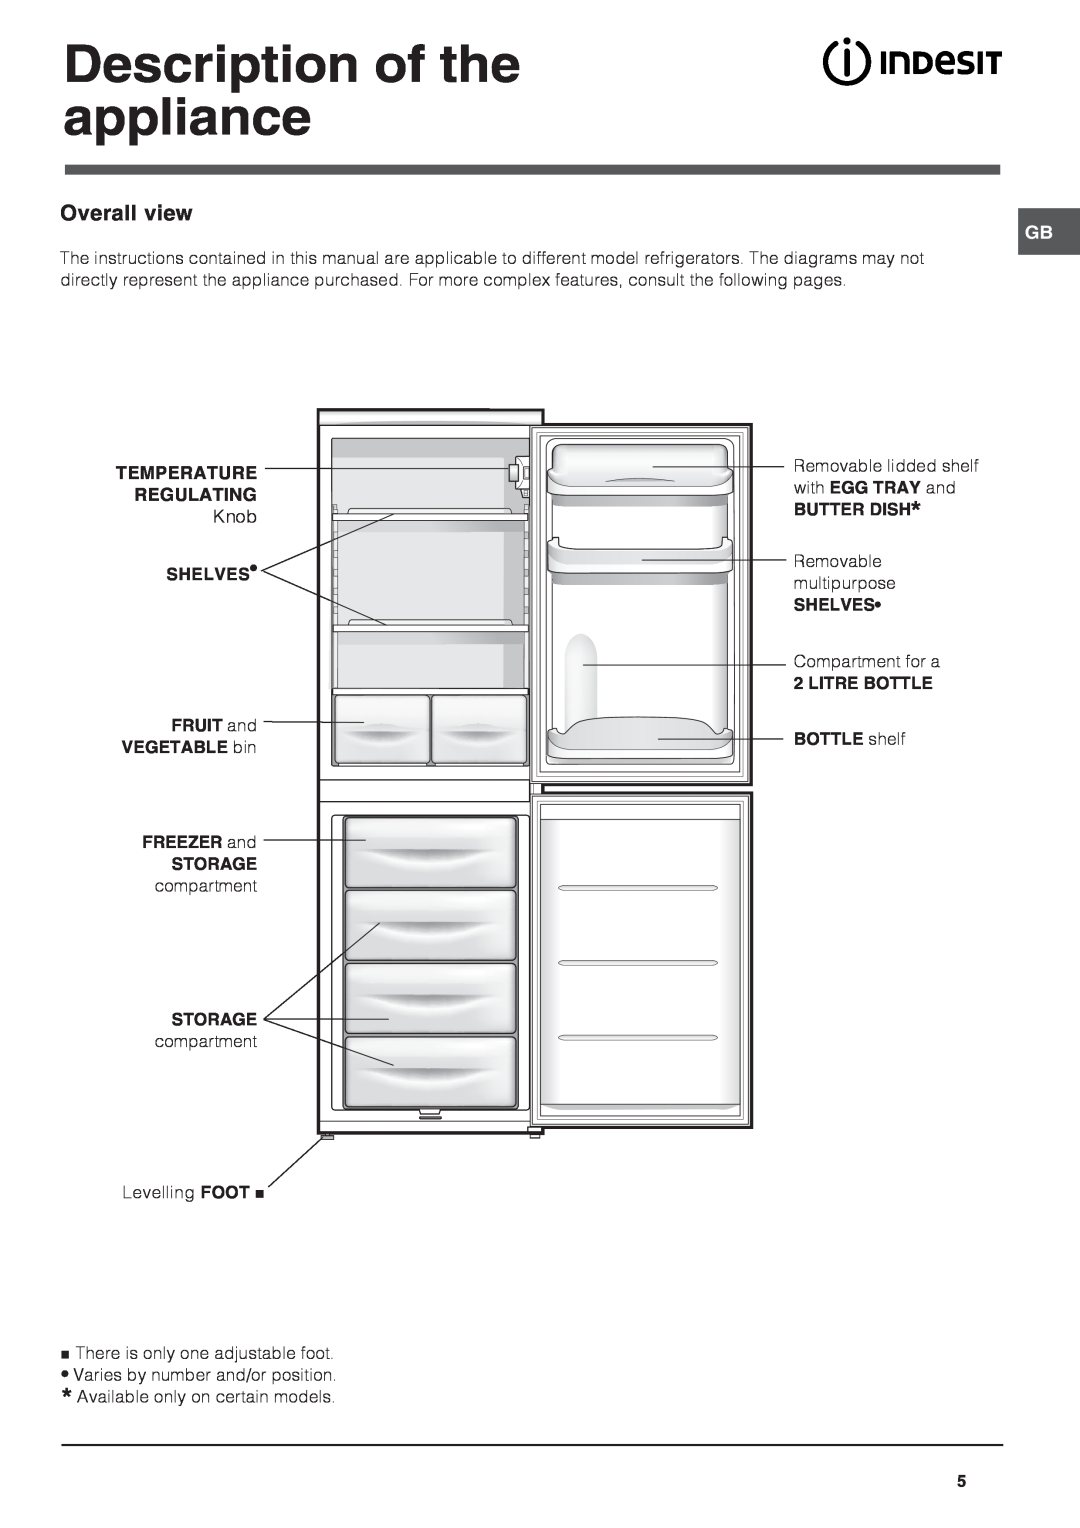 Indesit CA 55 K, CA 55 (UK) Description of the appliance, Overall view, Temperature Regulating, Butter Dish, Shelves 